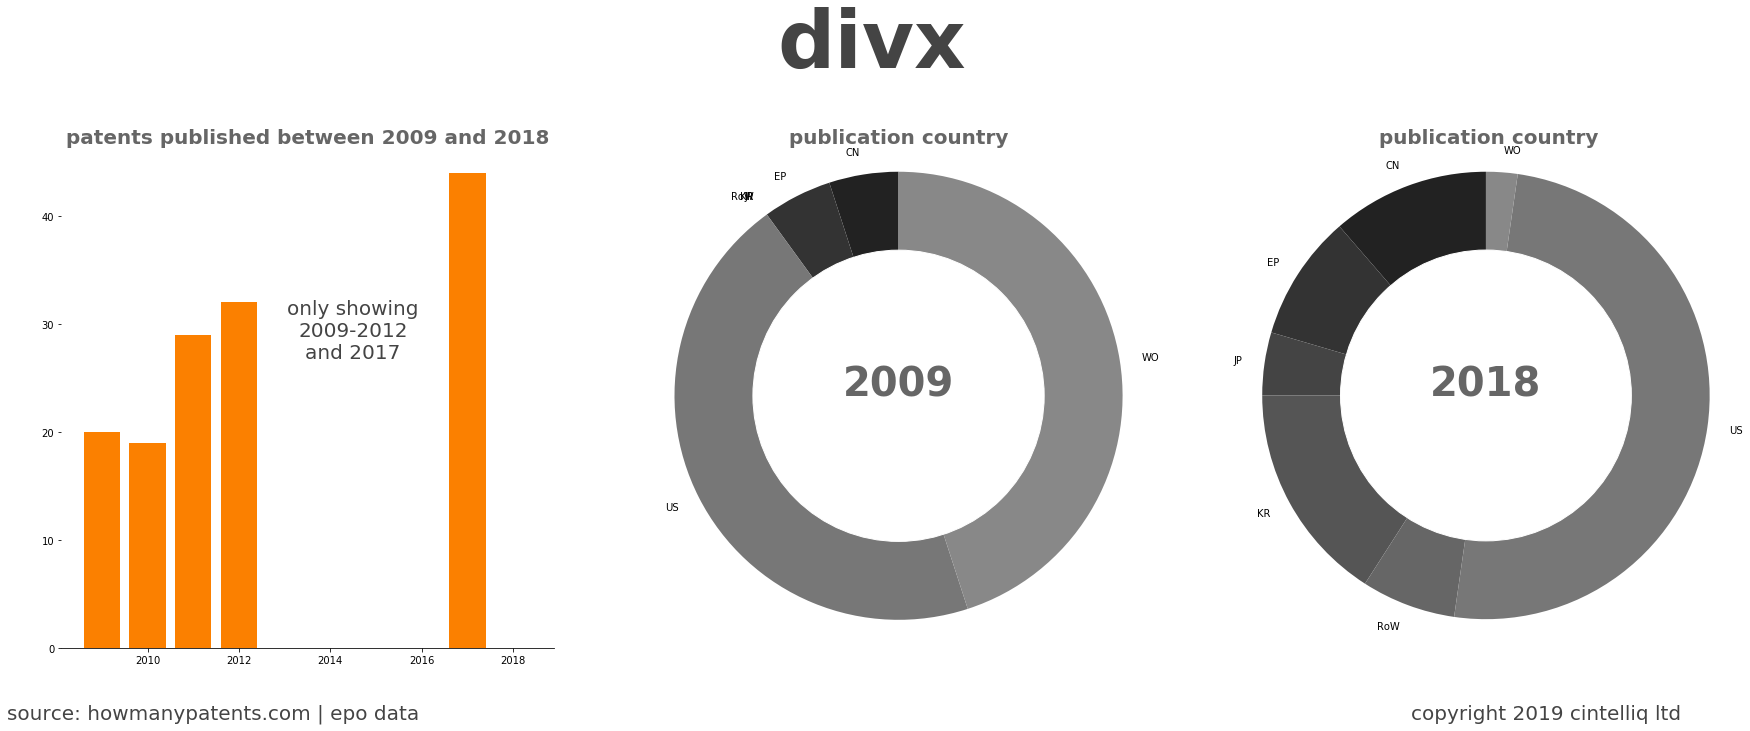 summary of patents for Divx